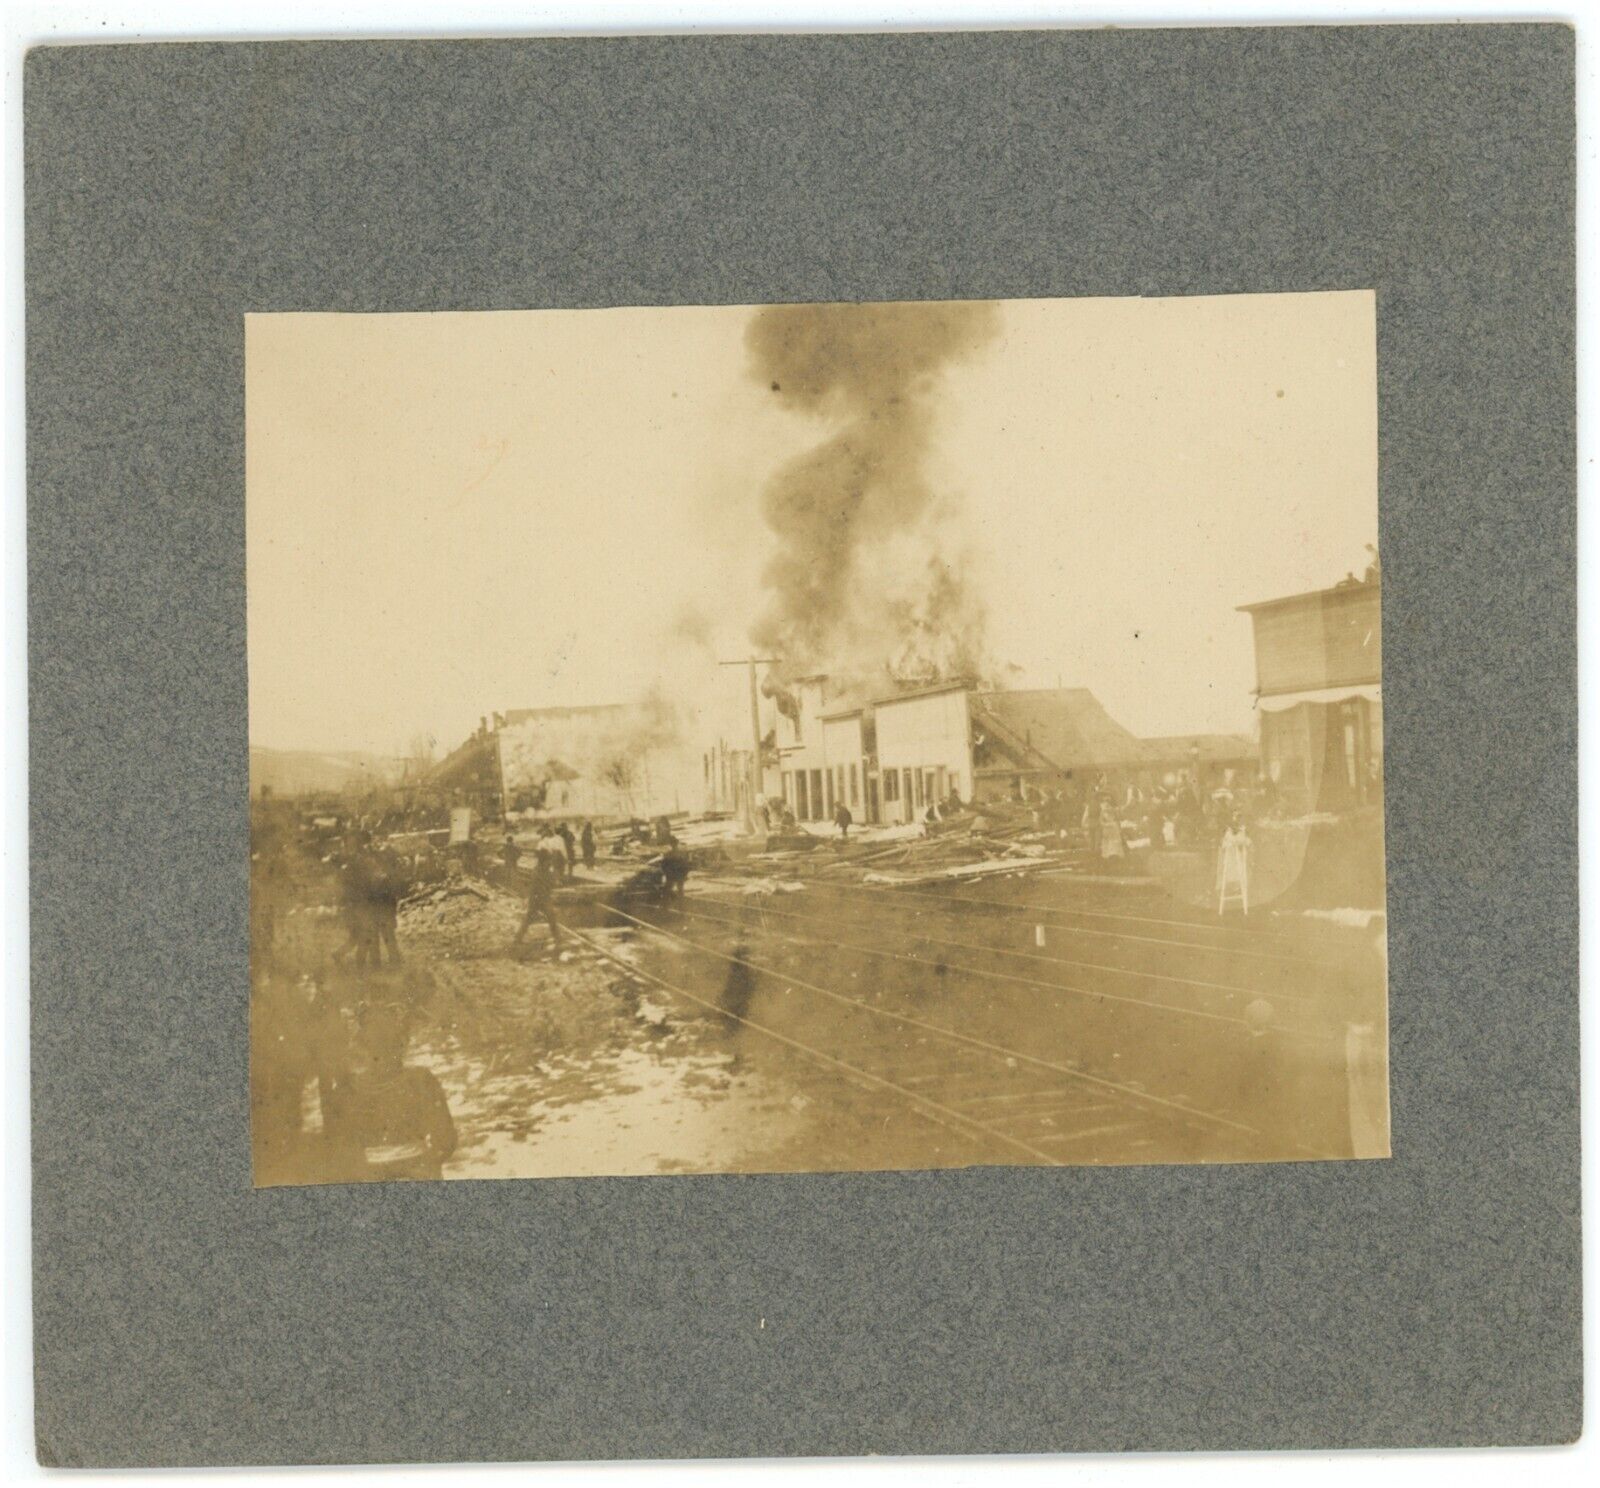 CIRCA 1880'S RARE 6X5.5 IN CABINET CARD Showing a Large Building On Fire Smoke